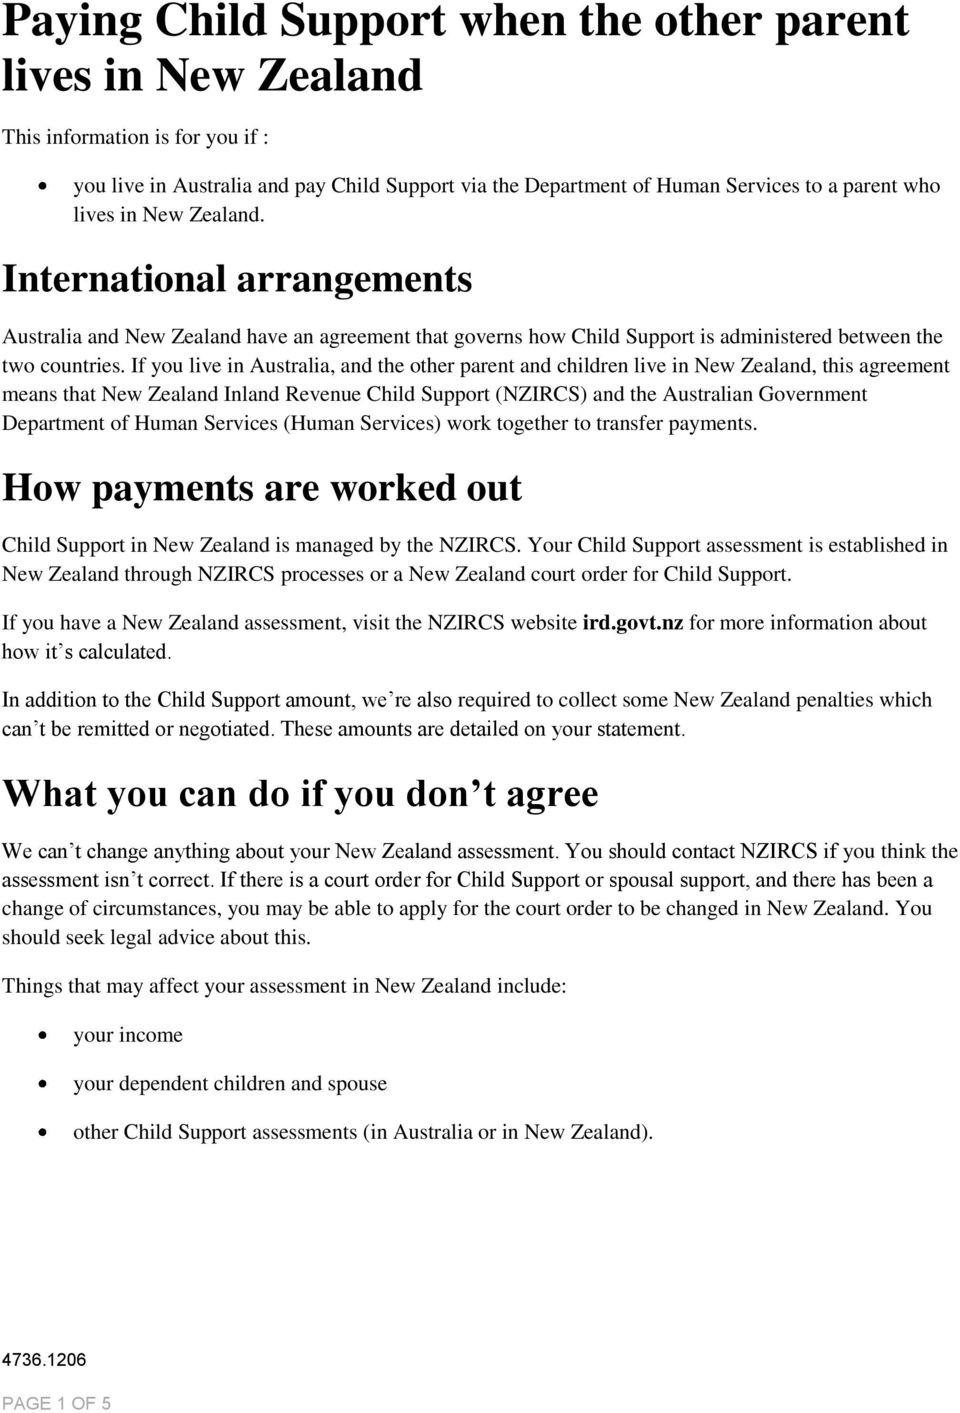 If you live in Australia, and the other parent and children live in New Zealand, this agreement means that New Zealand Inland Revenue Child Support (NZIRCS) and the Australian Government (Human